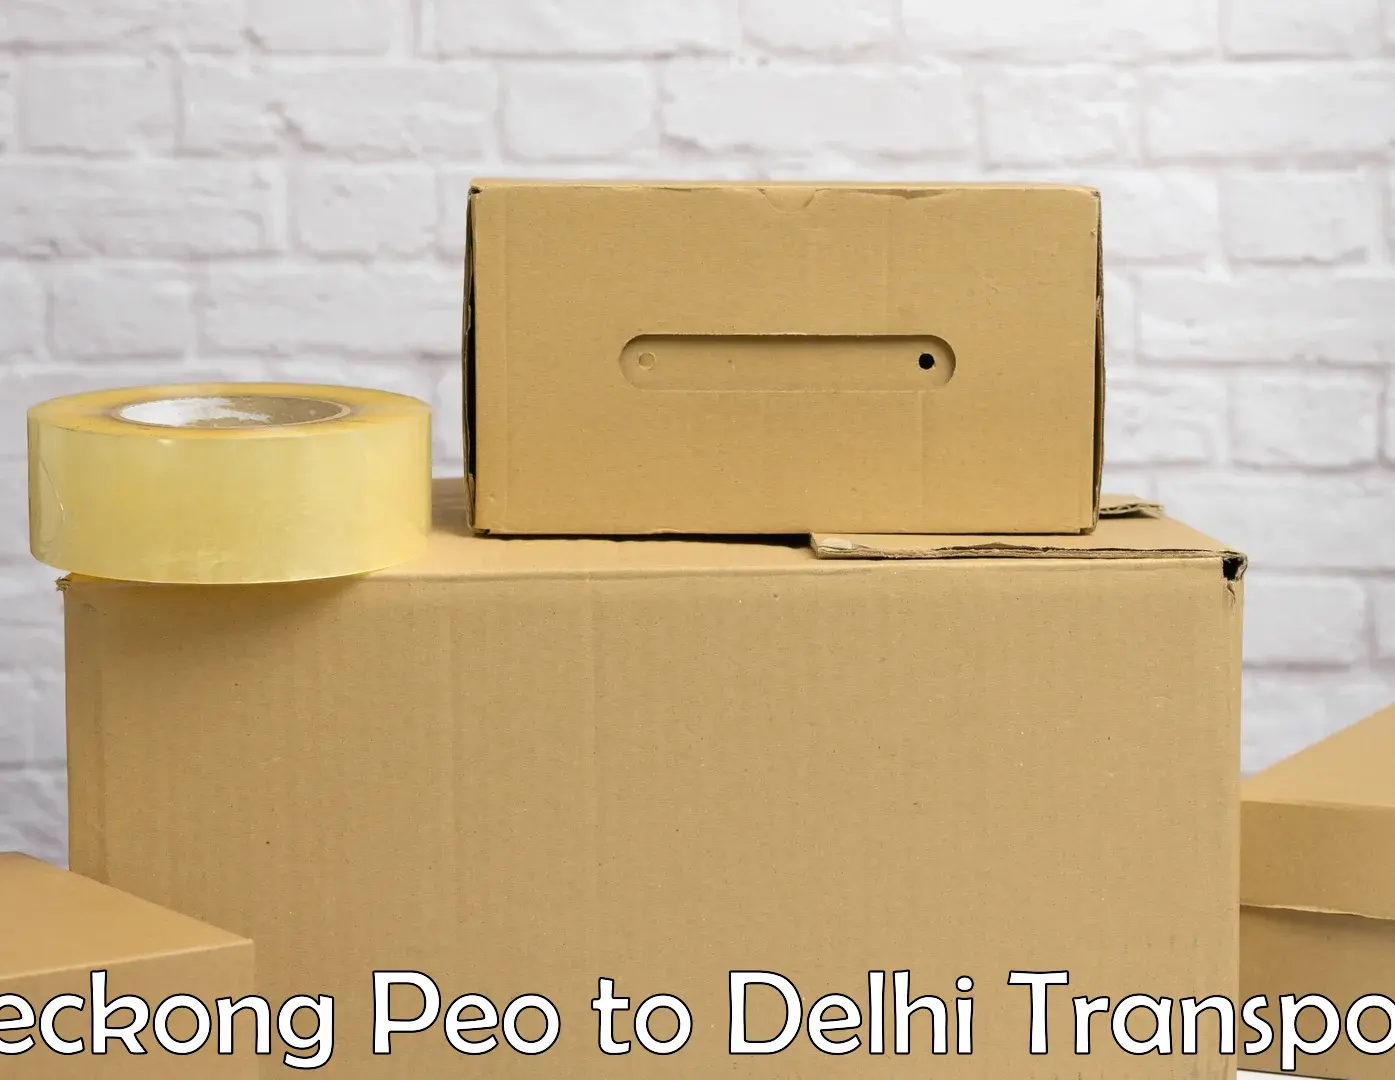 Container transport service Reckong Peo to Lodhi Road